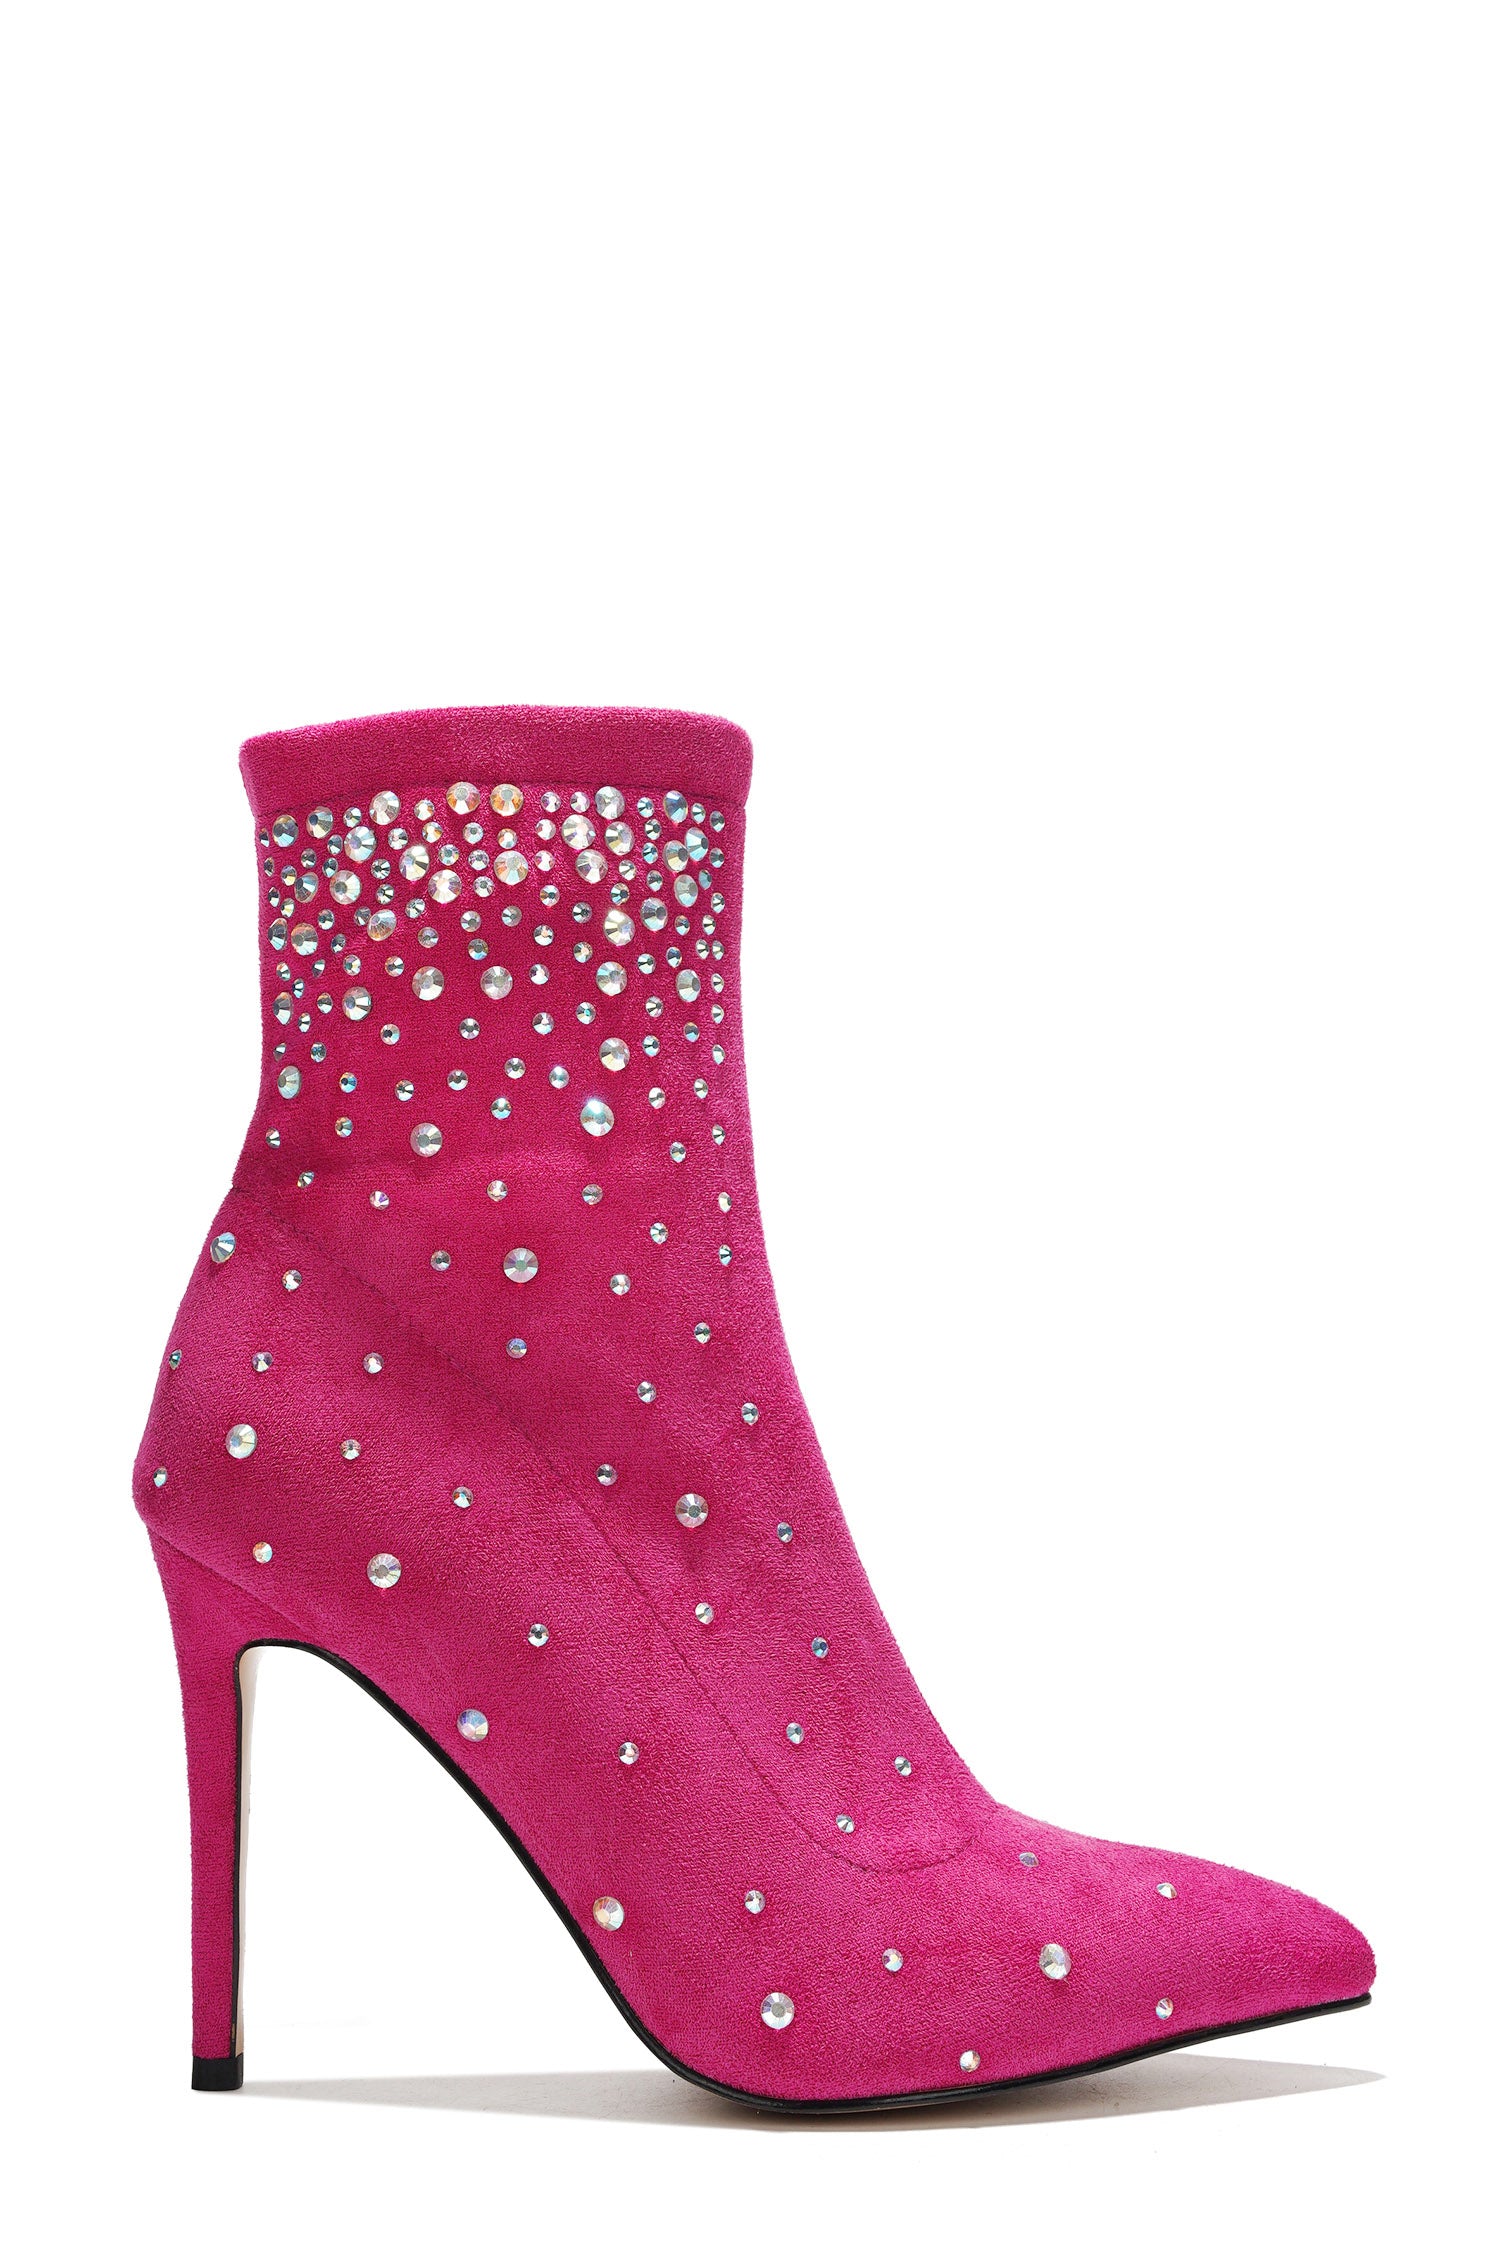 UrbanOG - Claremont Rhinestone-Crusted Ankle Boots - BOOTIES